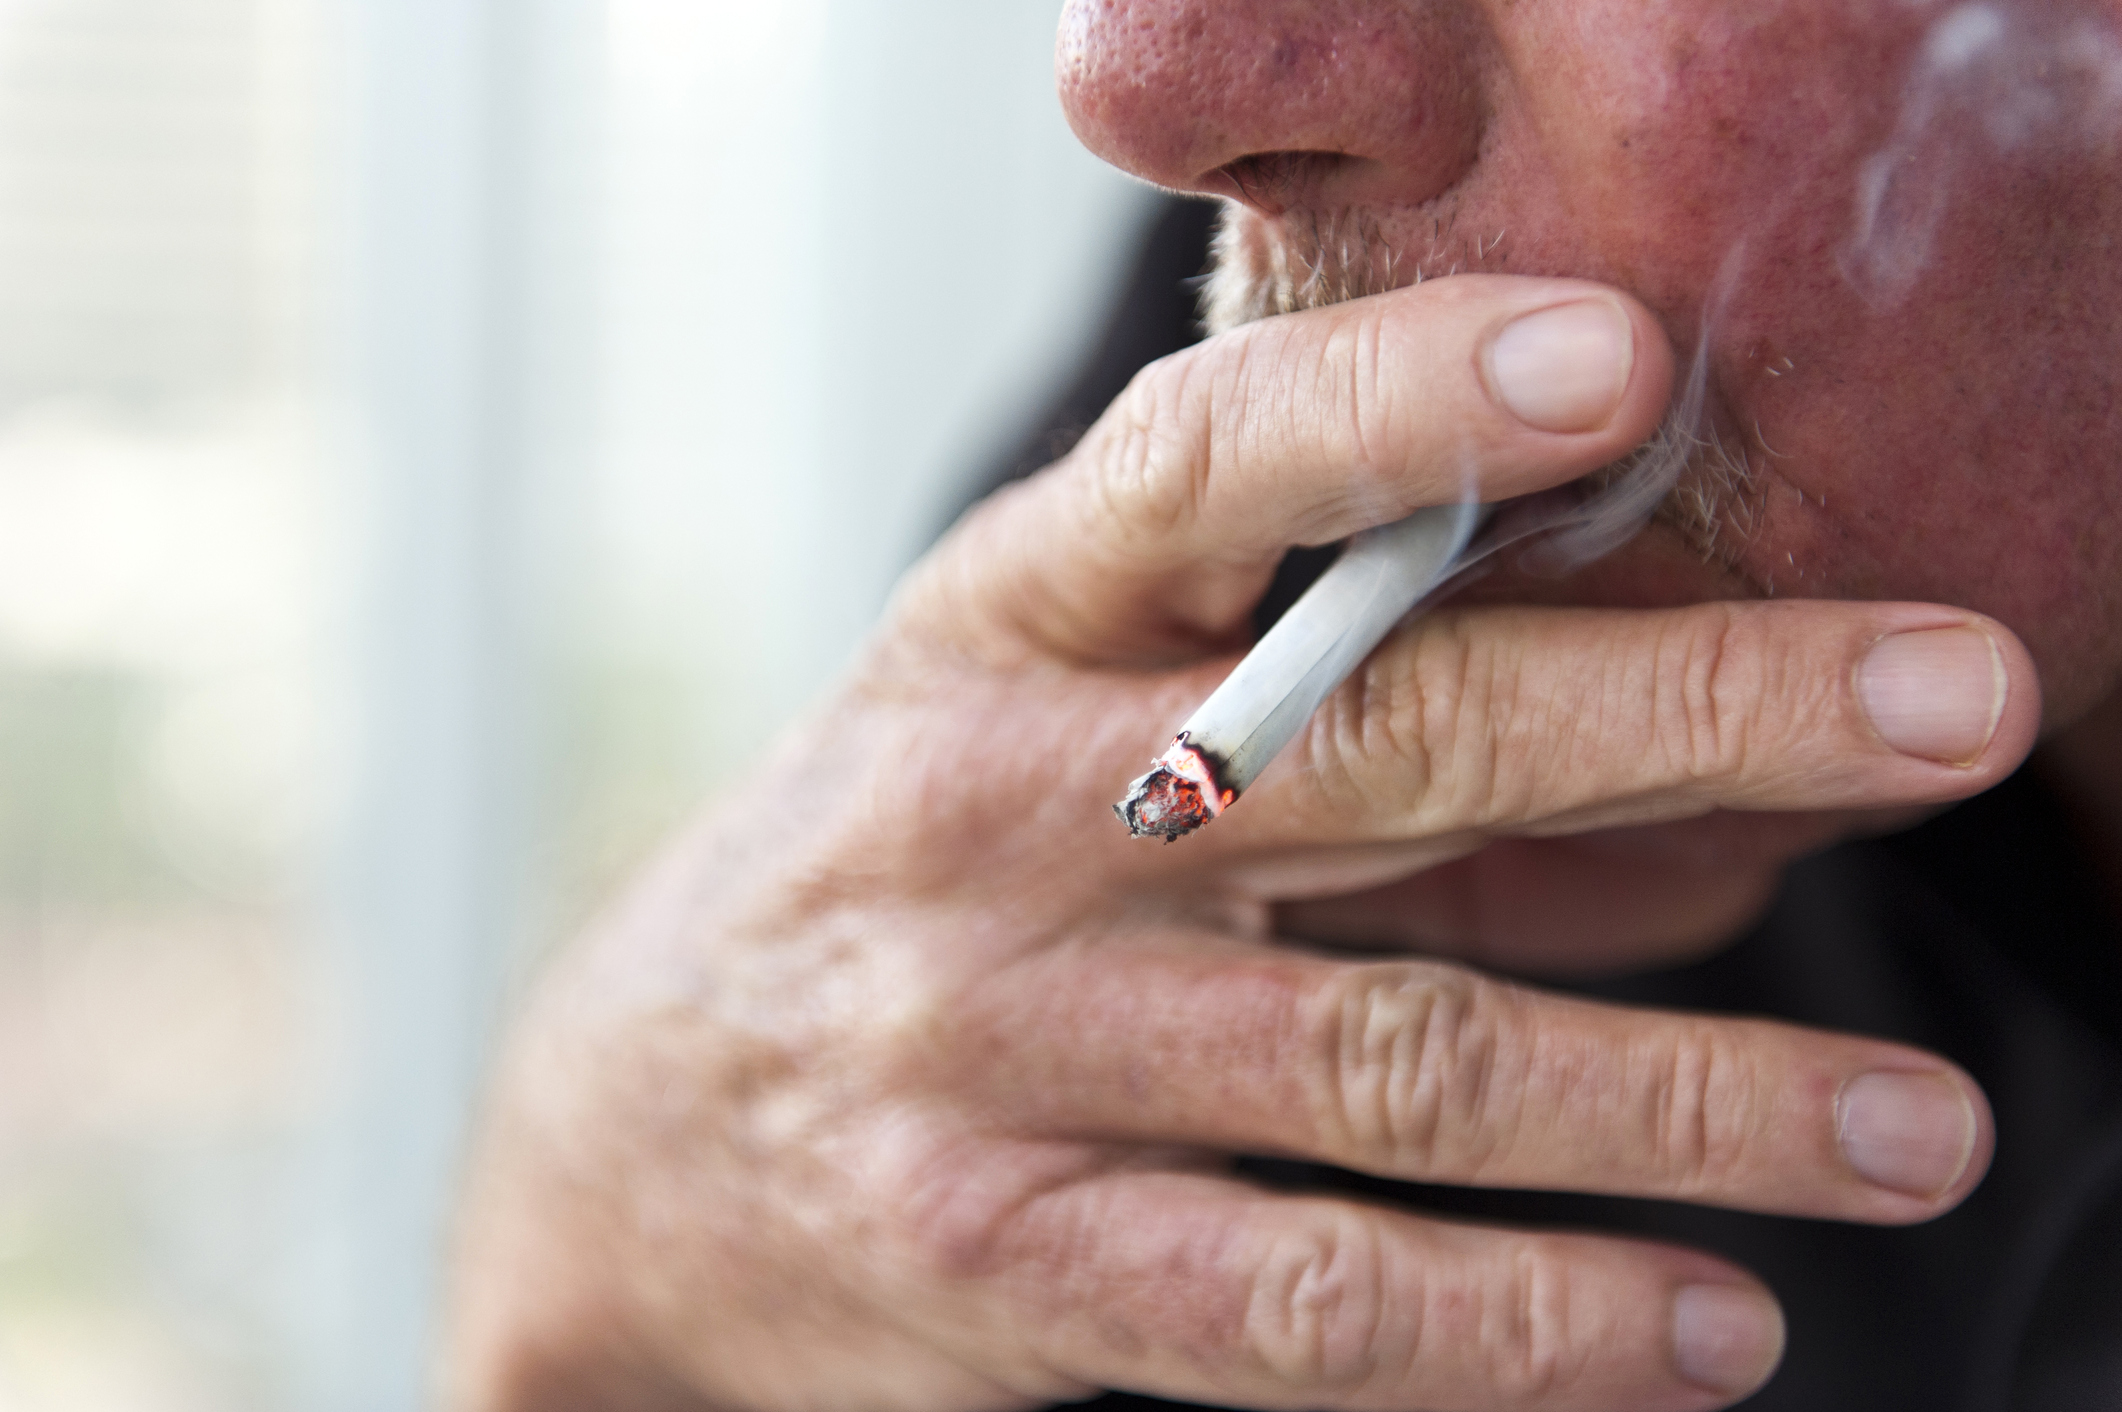 A man smoking a cigarette with smoke coming out of the end.